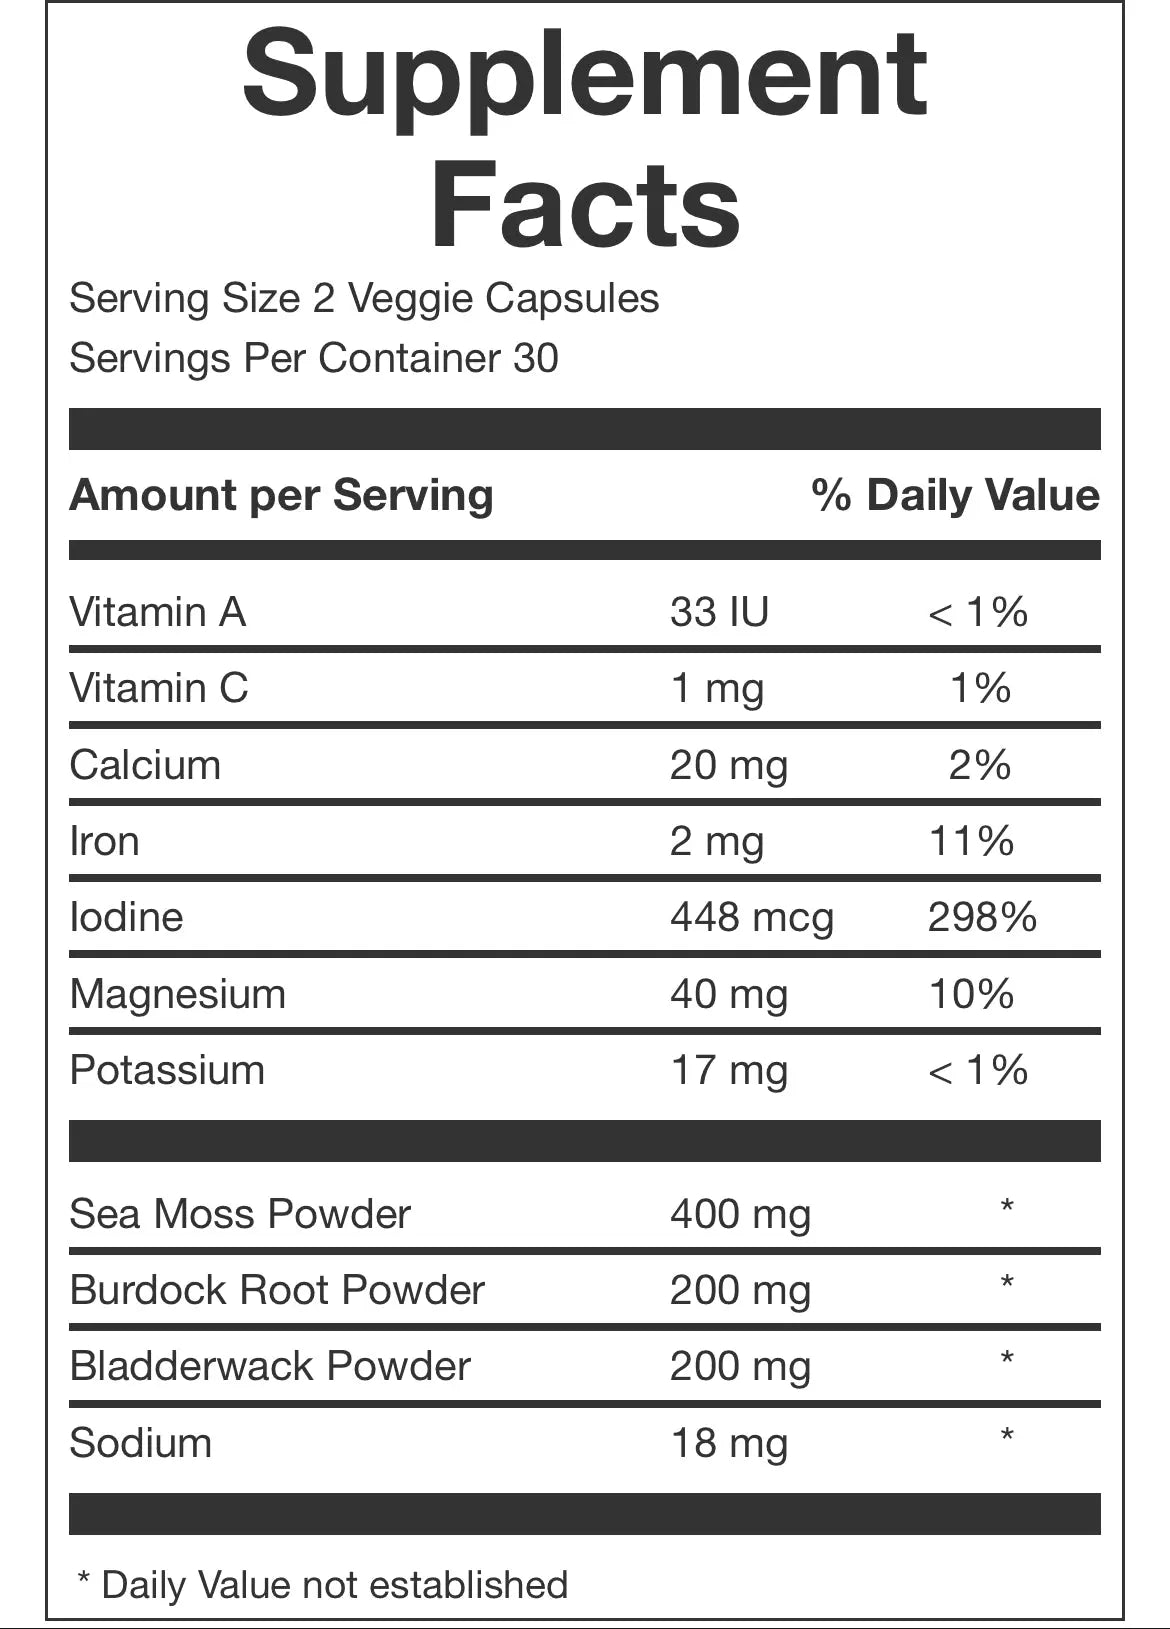 Sea moss Capsules 102 Minerals Complete - 60ct (800mg) - The Health Trap